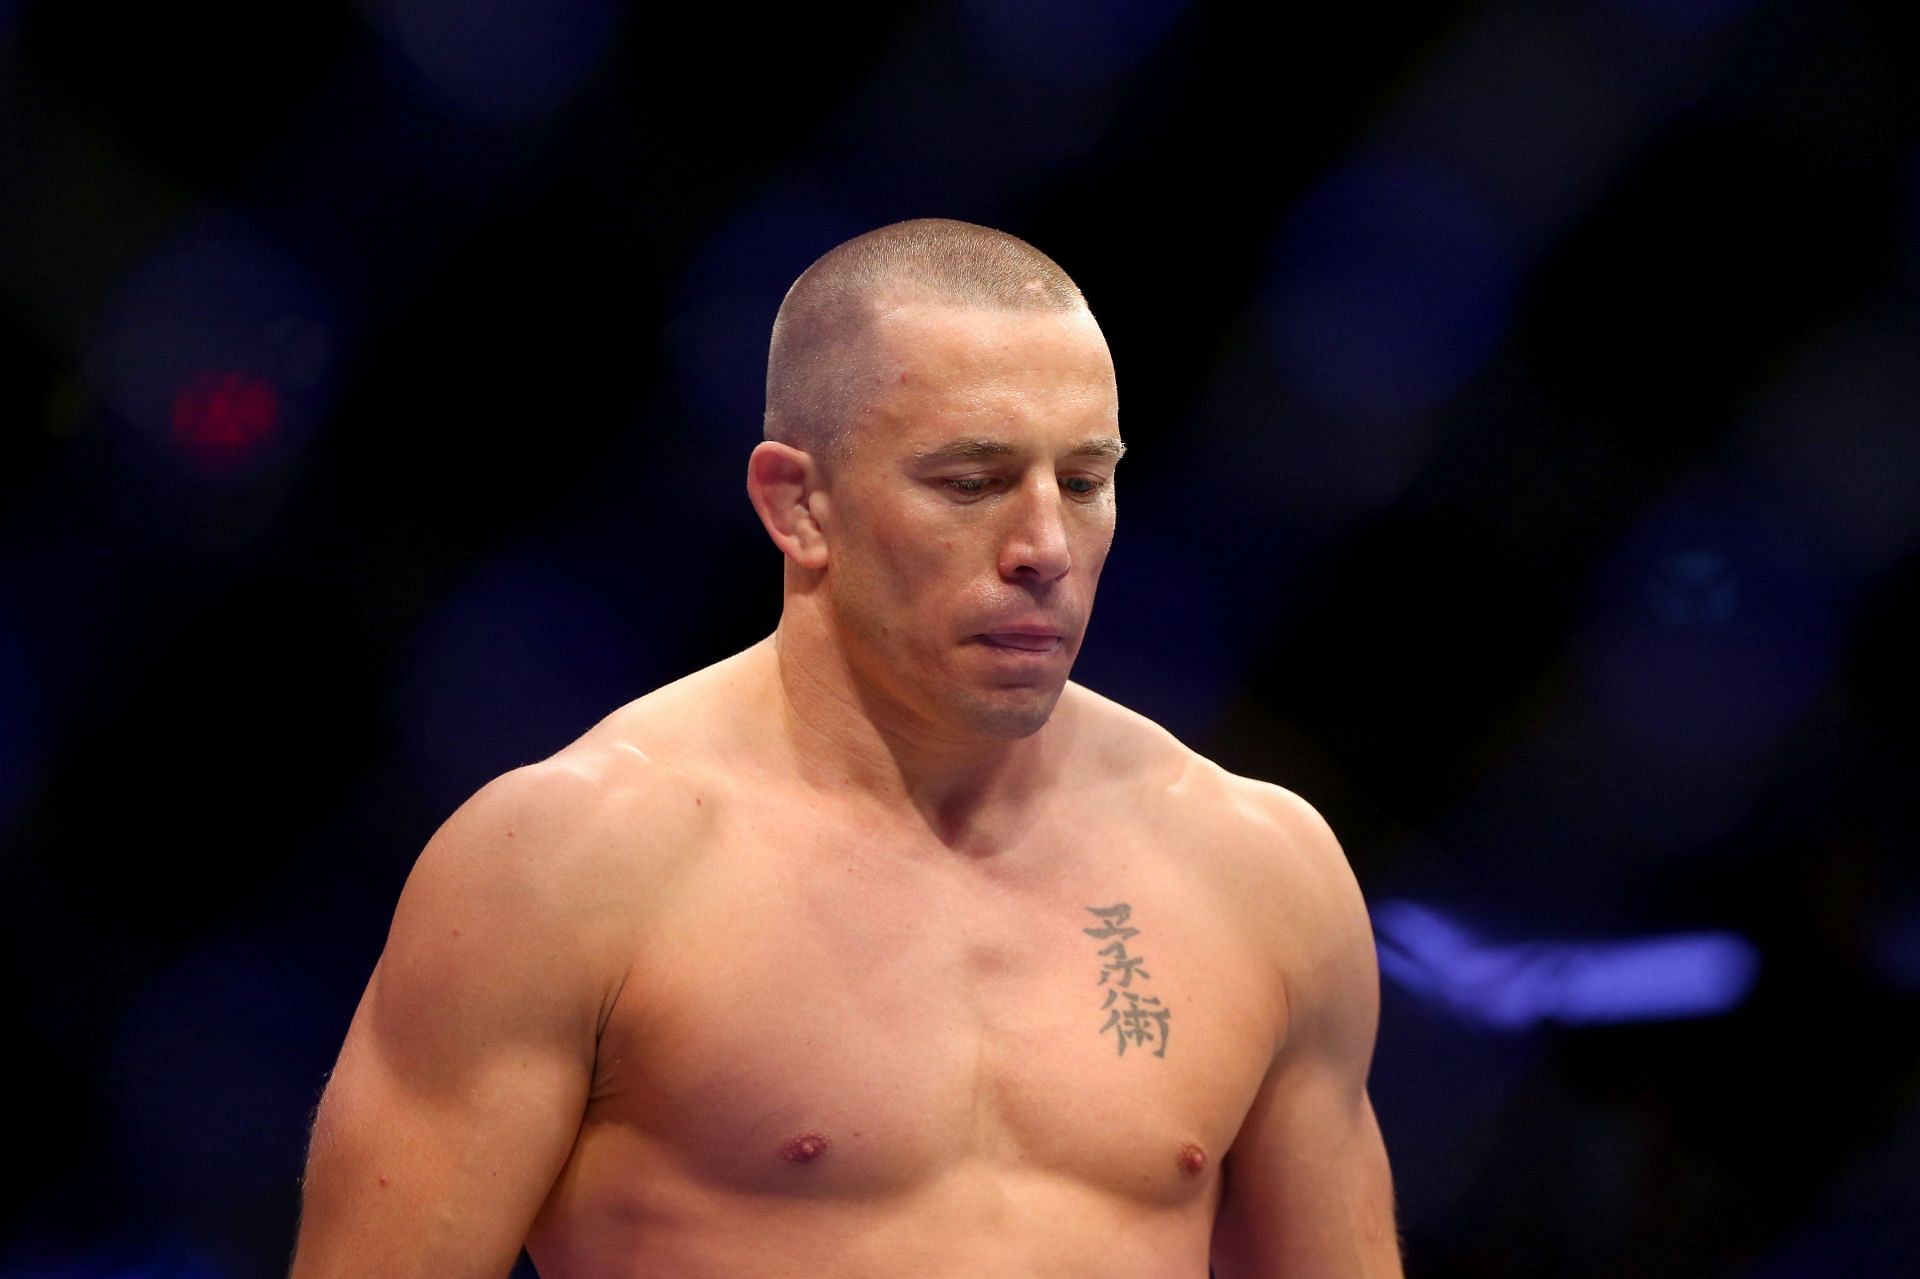 Once Georges St-Pierre defeated Matt Serra in a rematch, he went onto an epic run as welterweight champion